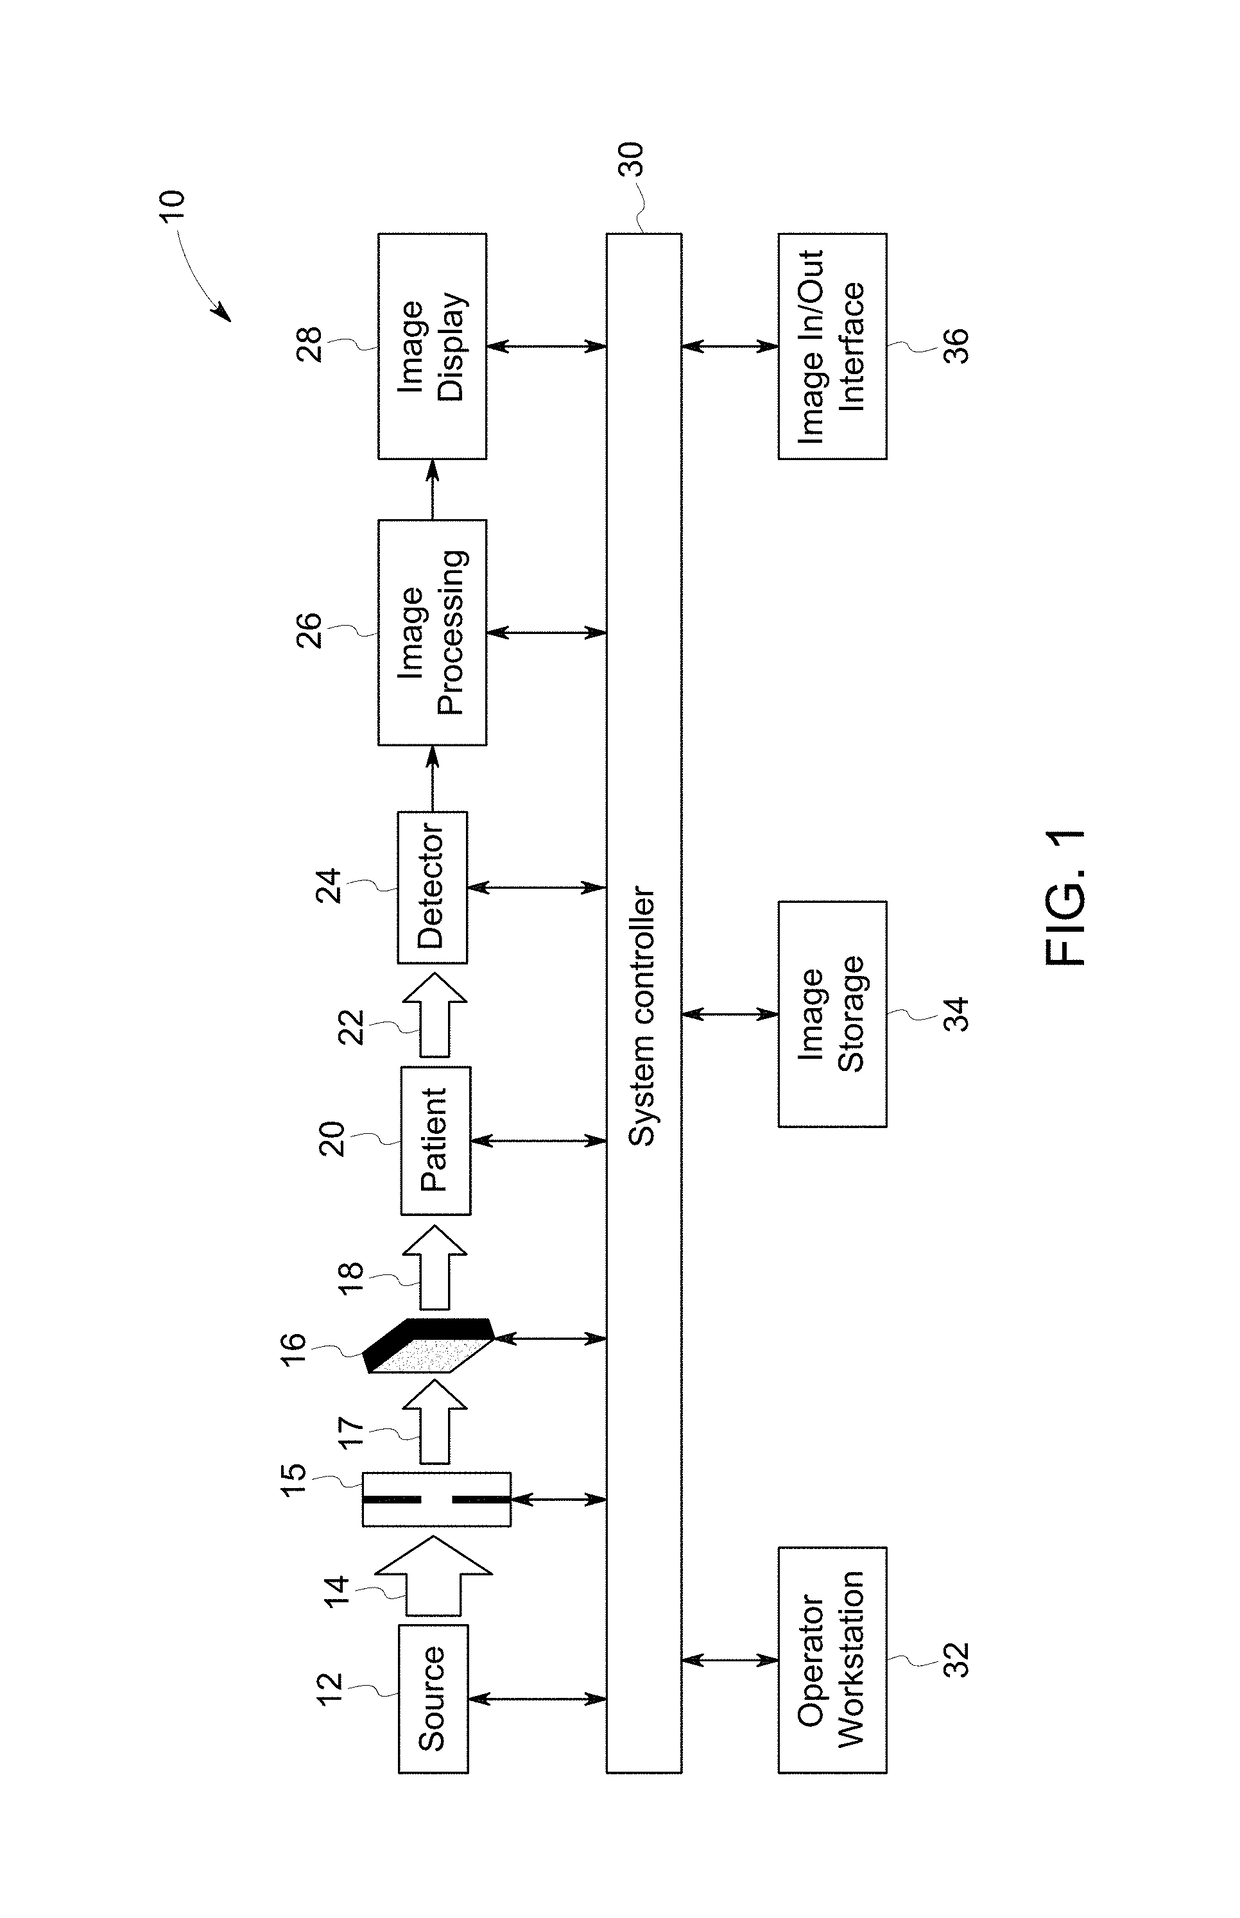 X-ray imaging system and method with a real-time controllable 3D X-ray attenuator